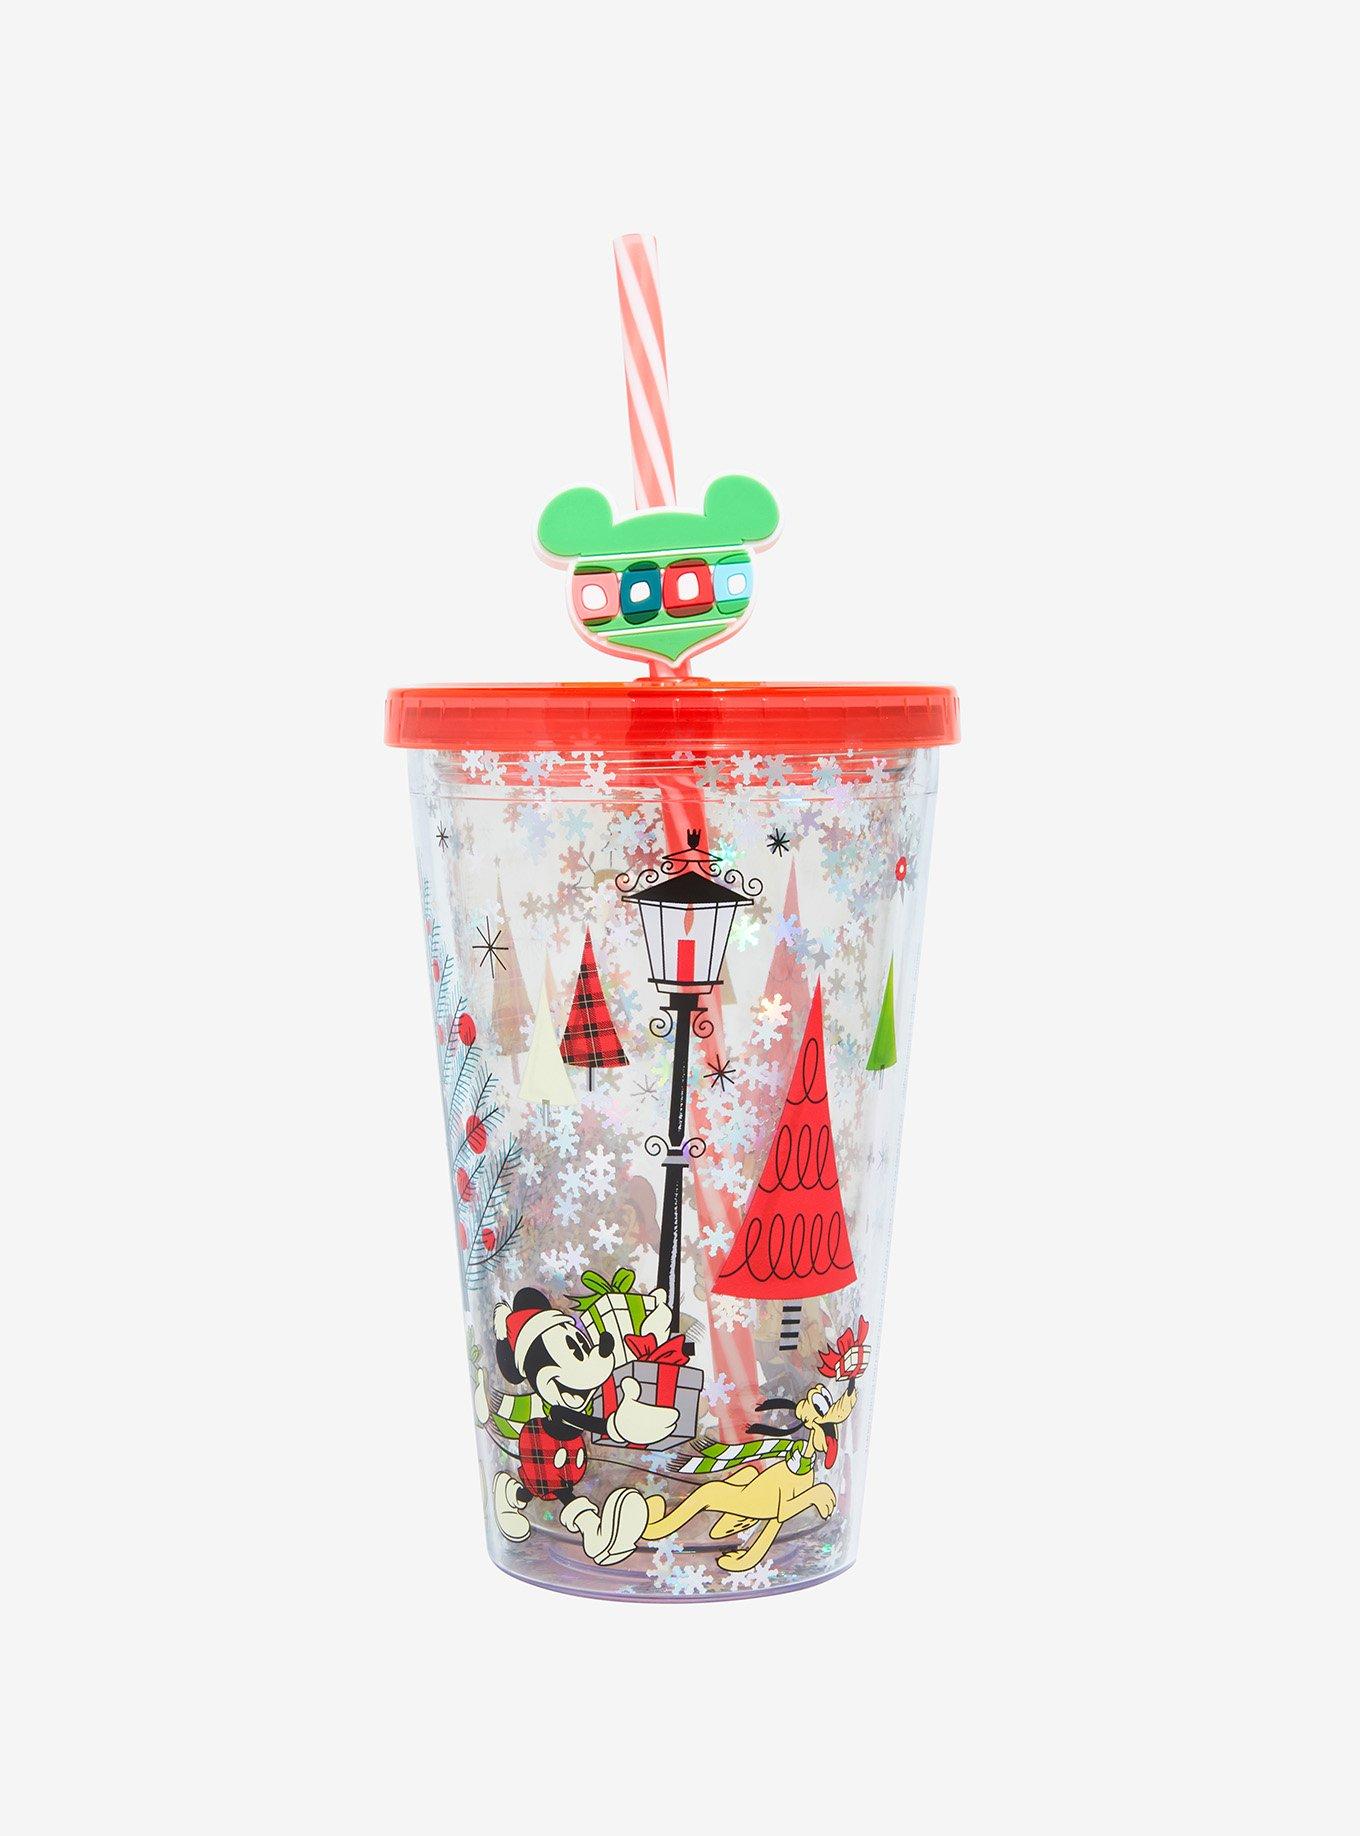 Mickey Mouse and Friends Measuring Cup Set – Magical Travels by Amy